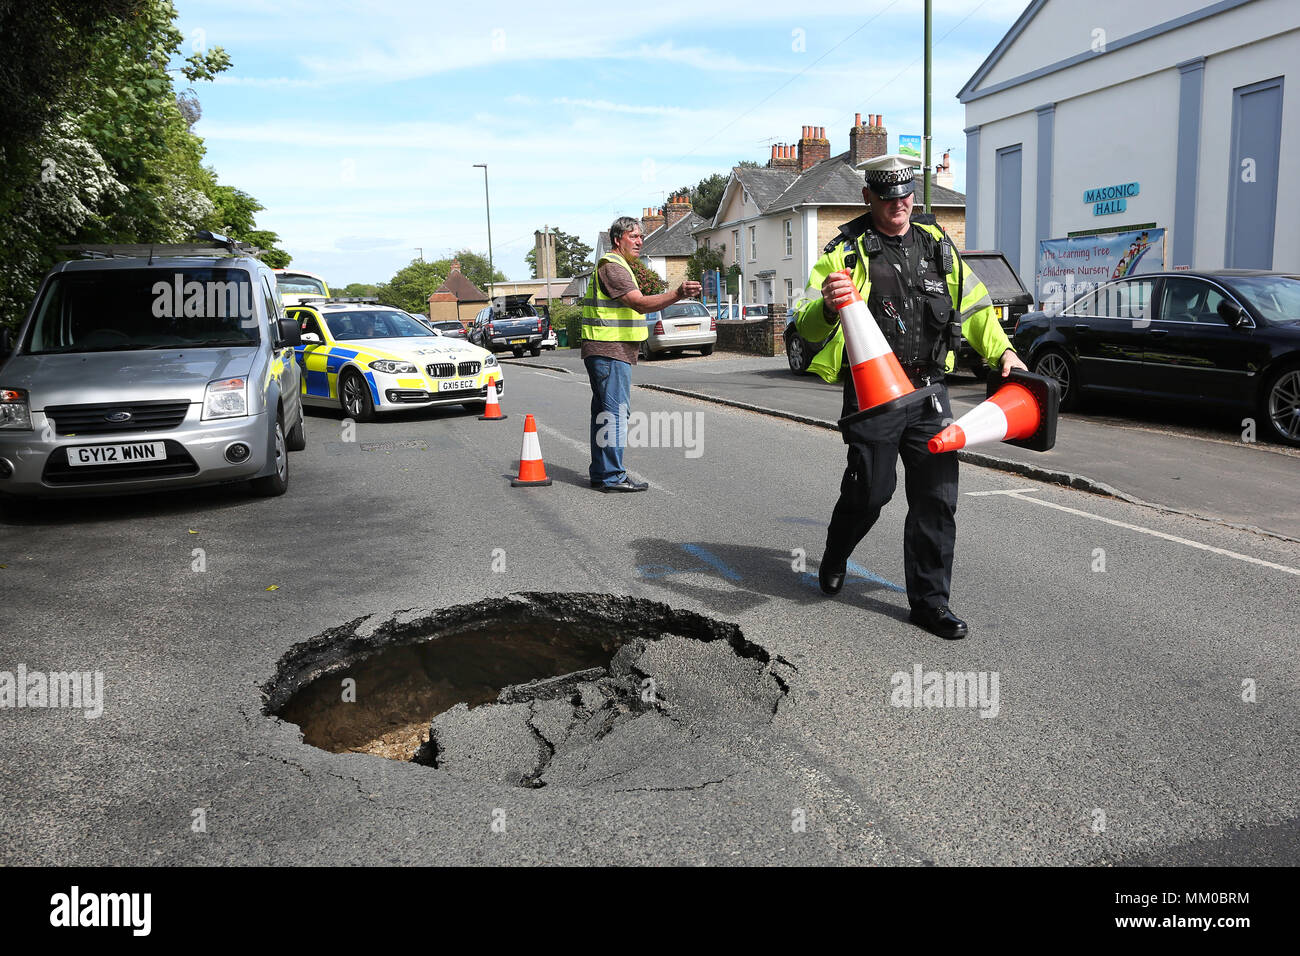 Midhurst, Near Chichester, West Sussex, UK. A huge sink hole pictured on Bepton Road, close to the high street and causing long delays. Members of the public directed traffic for over 45minutes until police arrived to close the road.  Wednesday 9th May 2018 © Sam Stephenson/Alamy Live News. Stock Photo